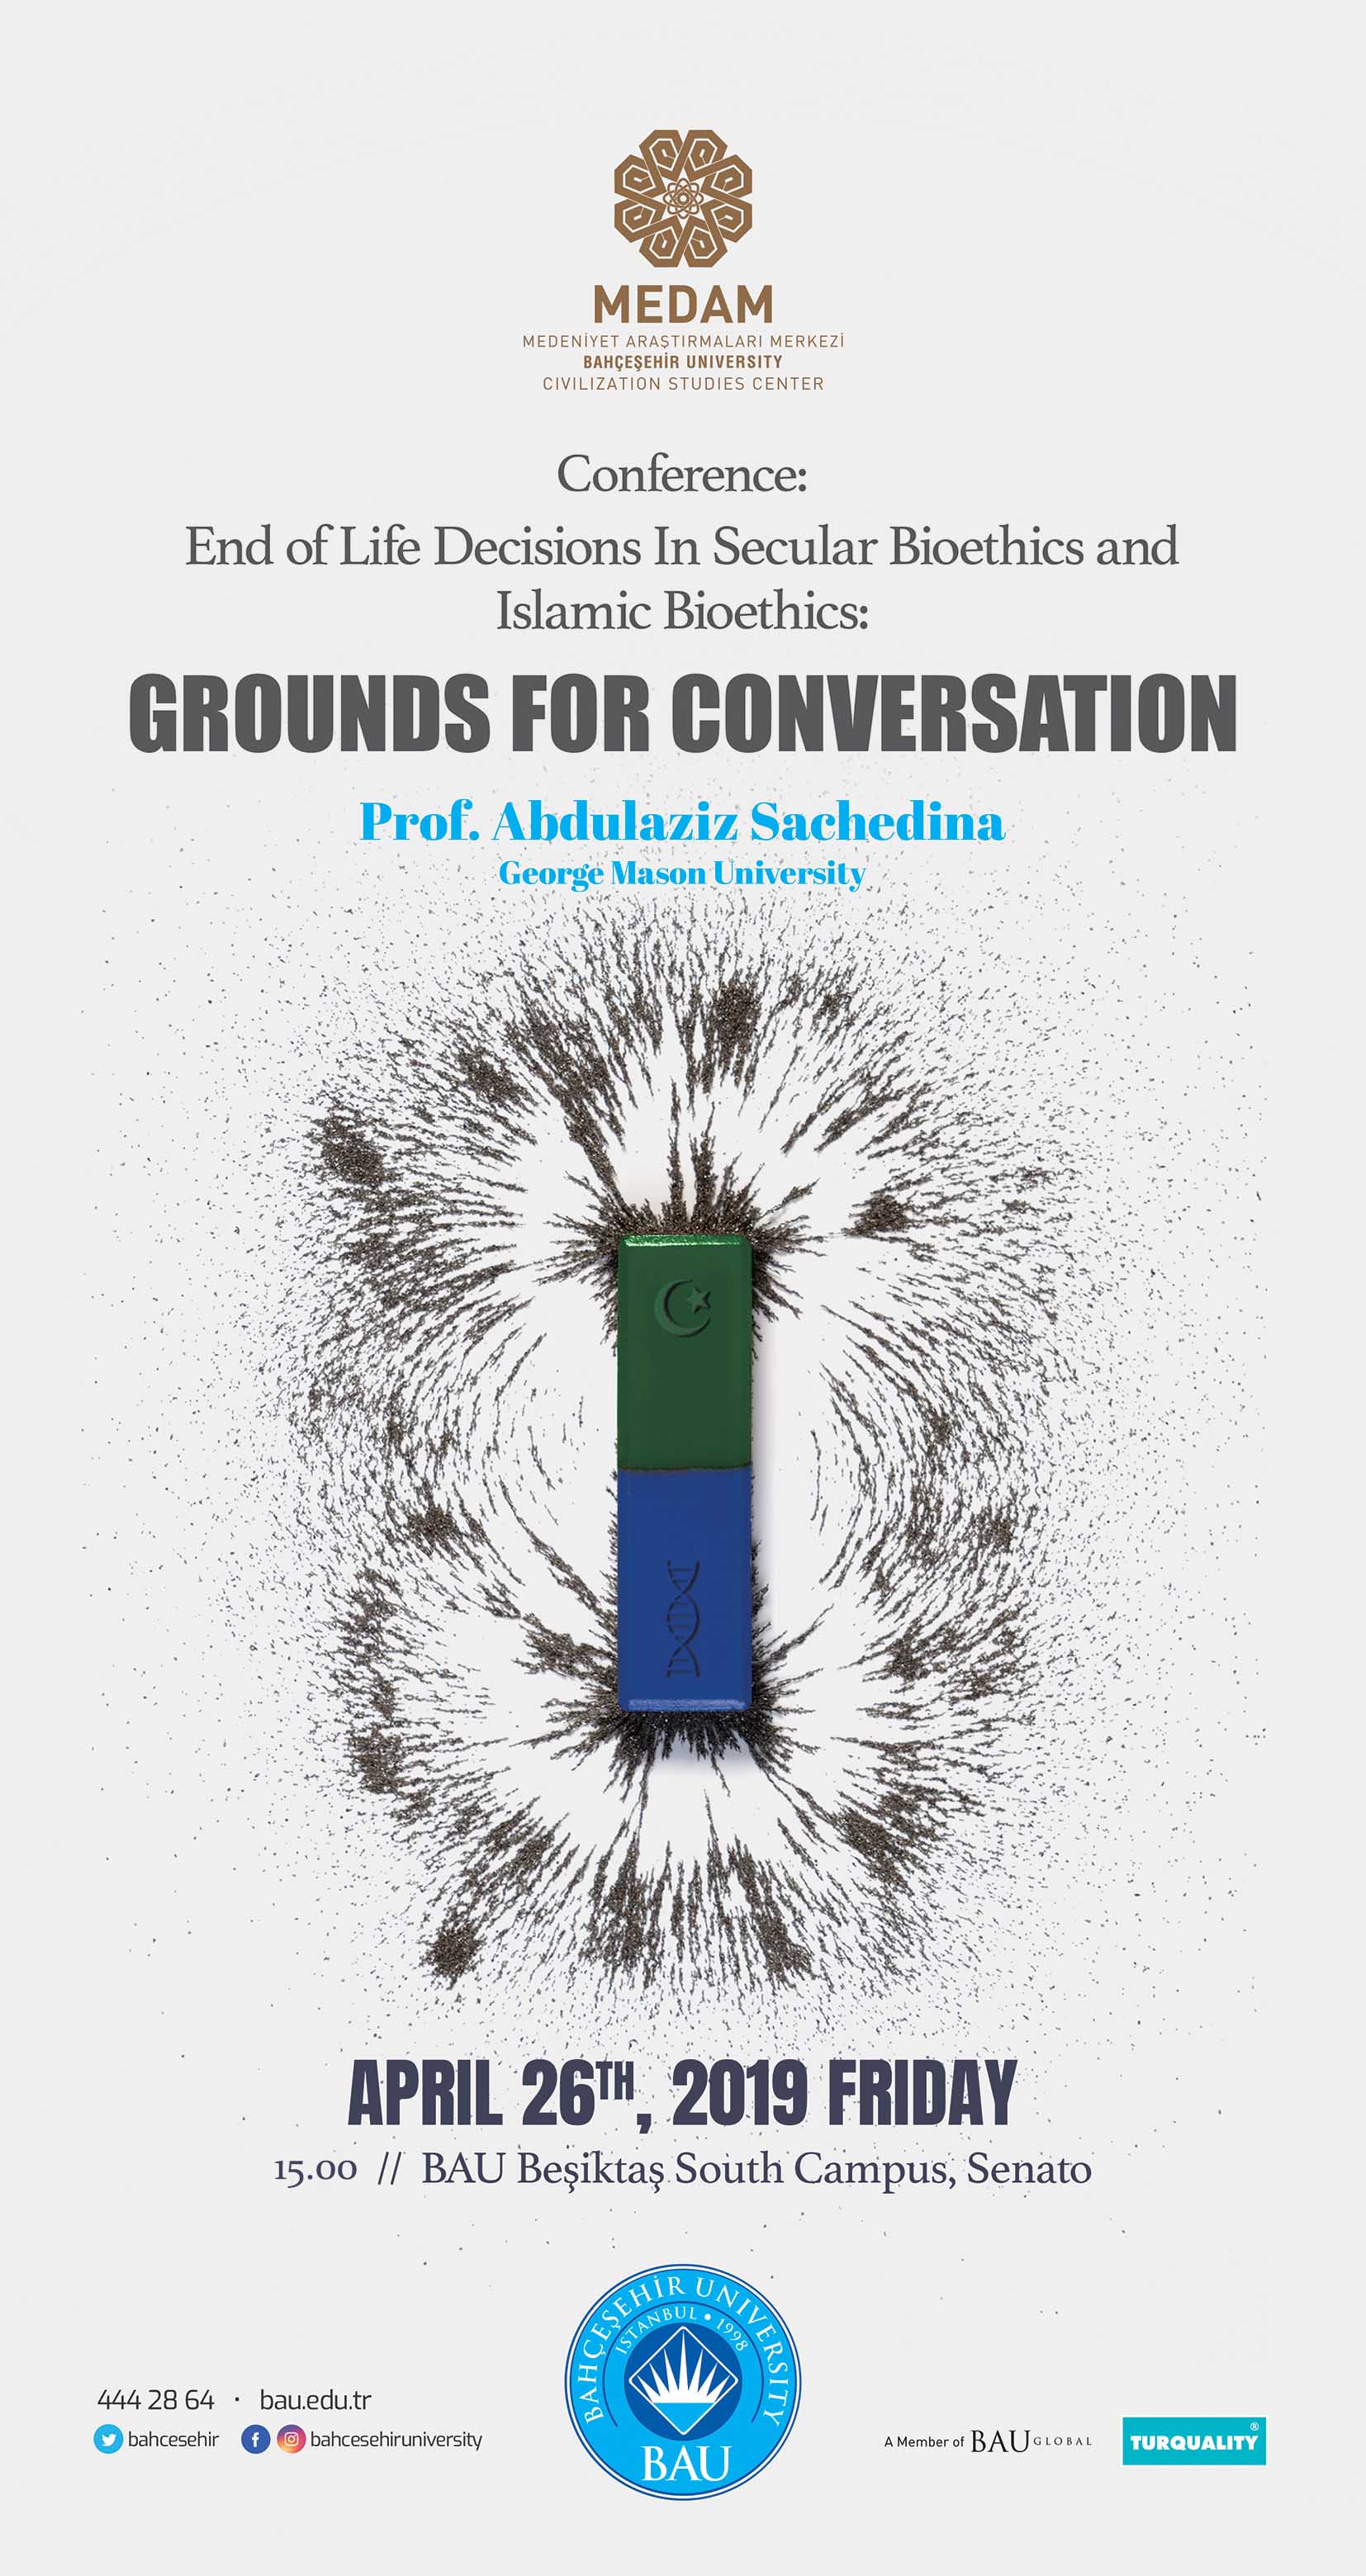 Conference: End of Life Decisions In Secular Bioethics and Islamic Bioethics: GROUNDS FOR CONVERSATION